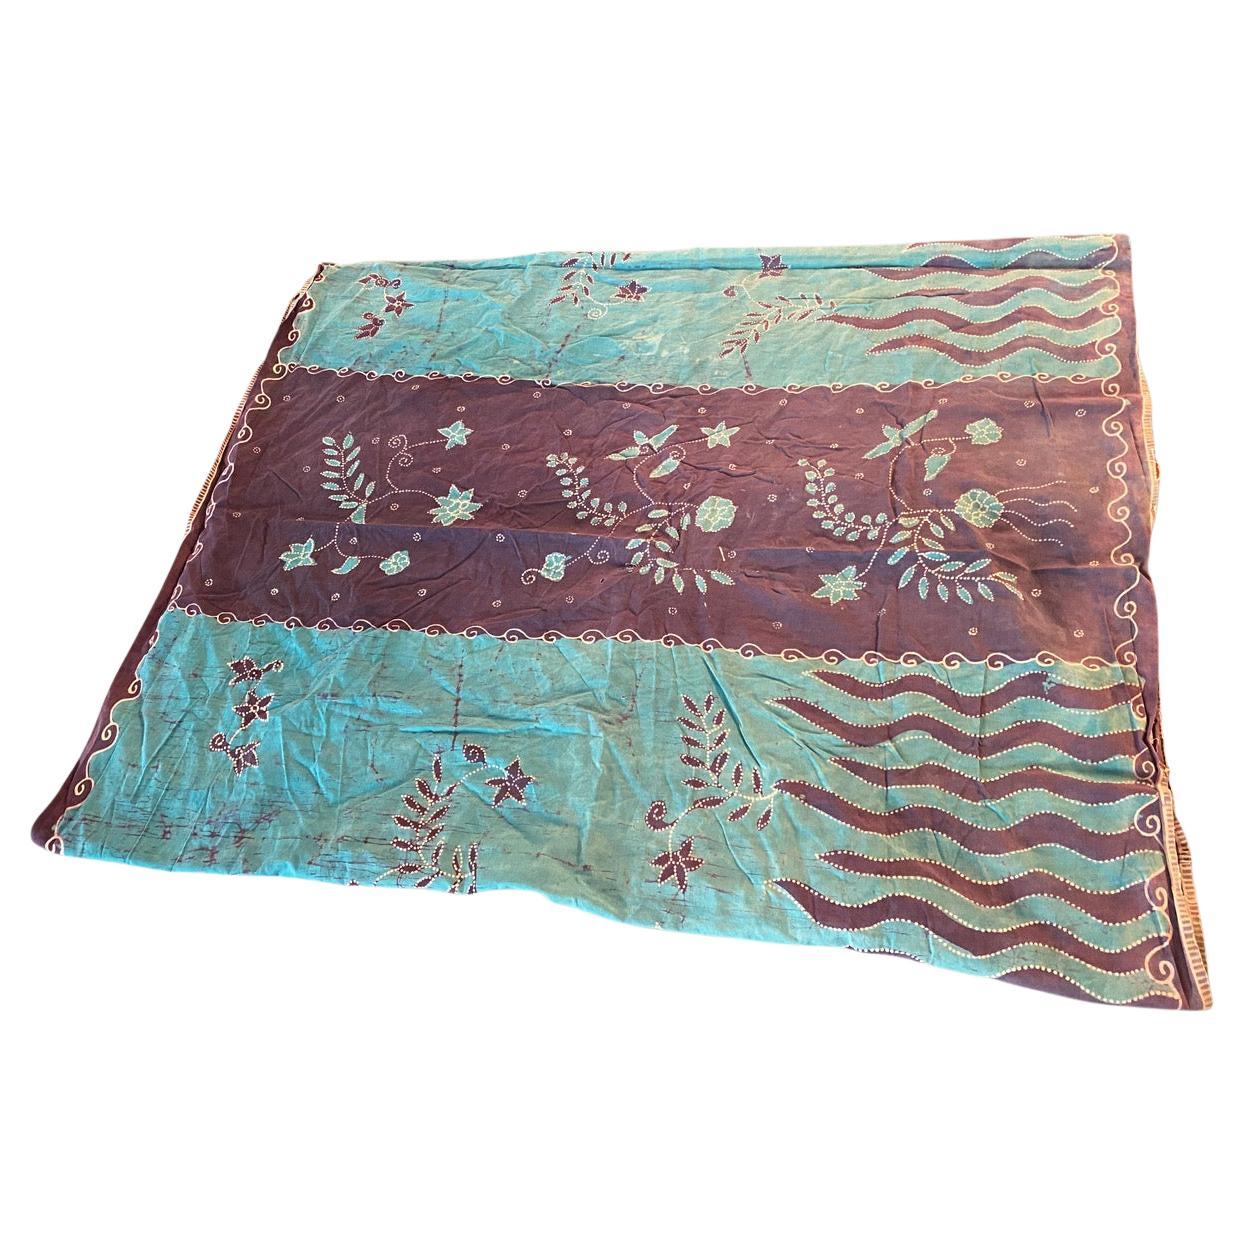 Andrianna Shamaris Antique Balinese Ceremonial Sarong For Sale